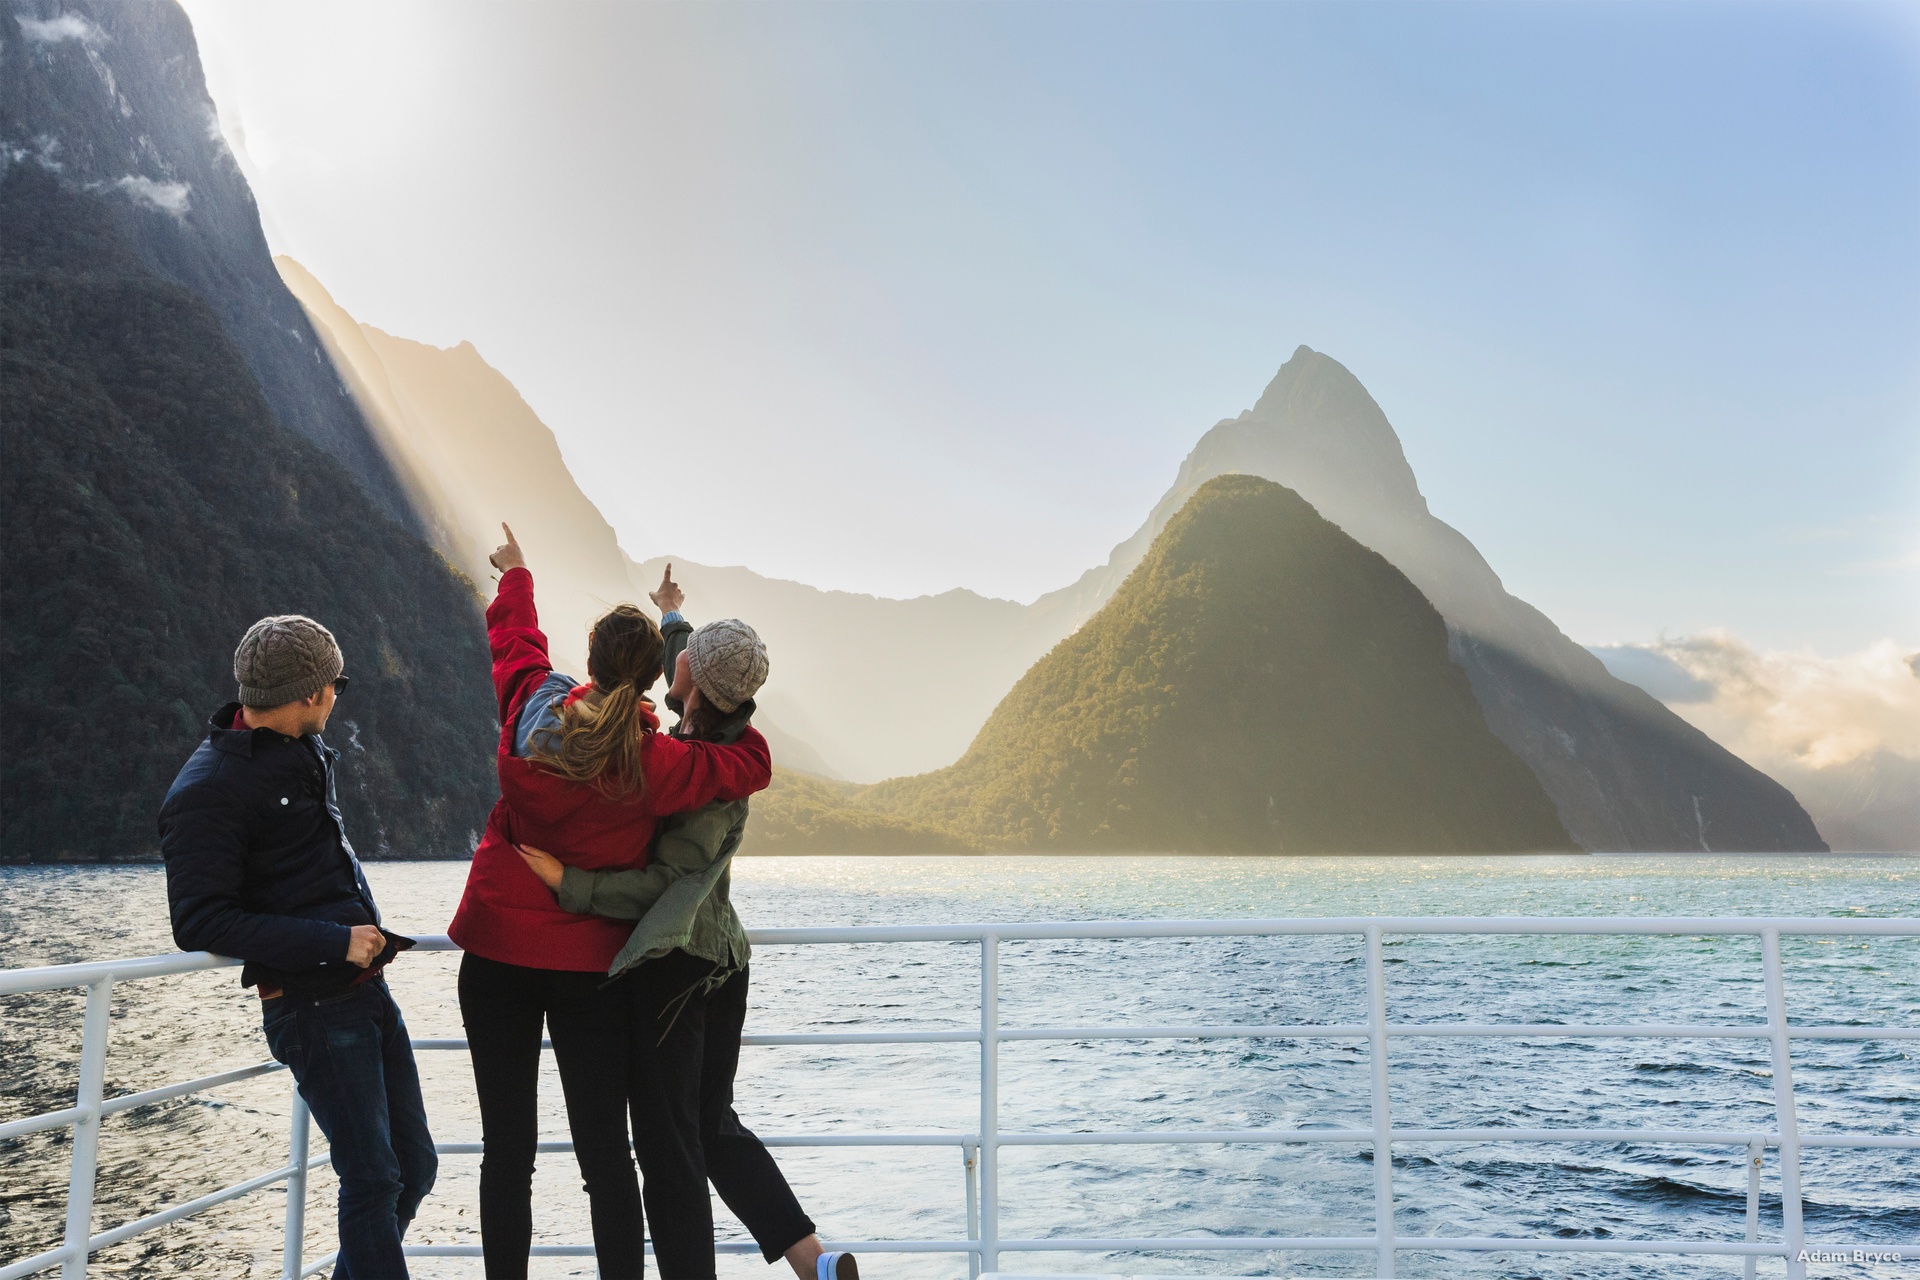 Milford Sound Day Trip: What are the options?